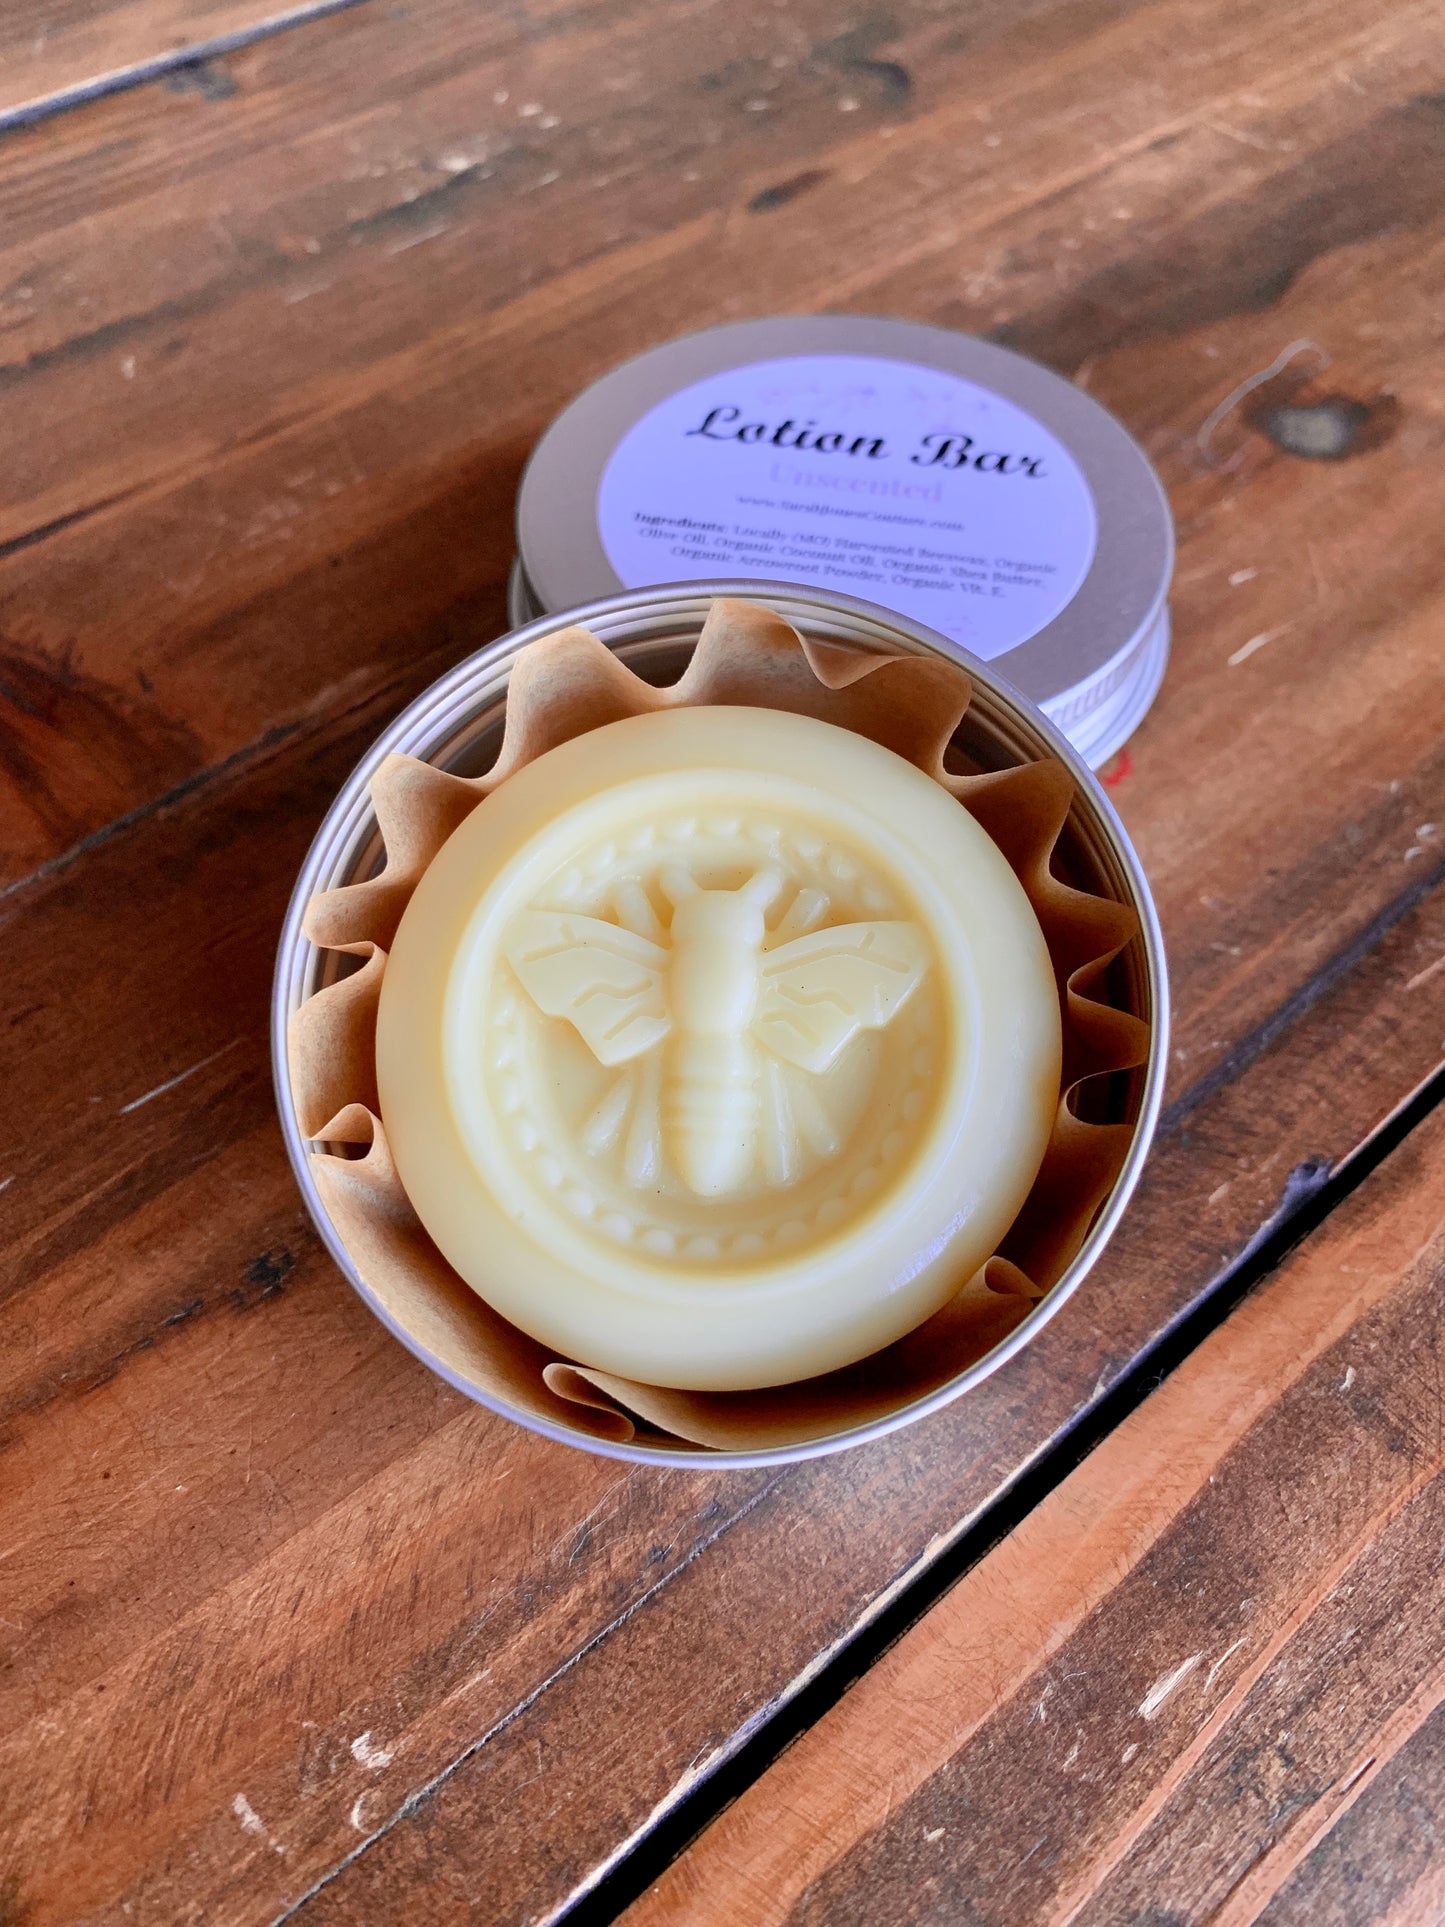 Unscented Natural Colored Lotion Bars